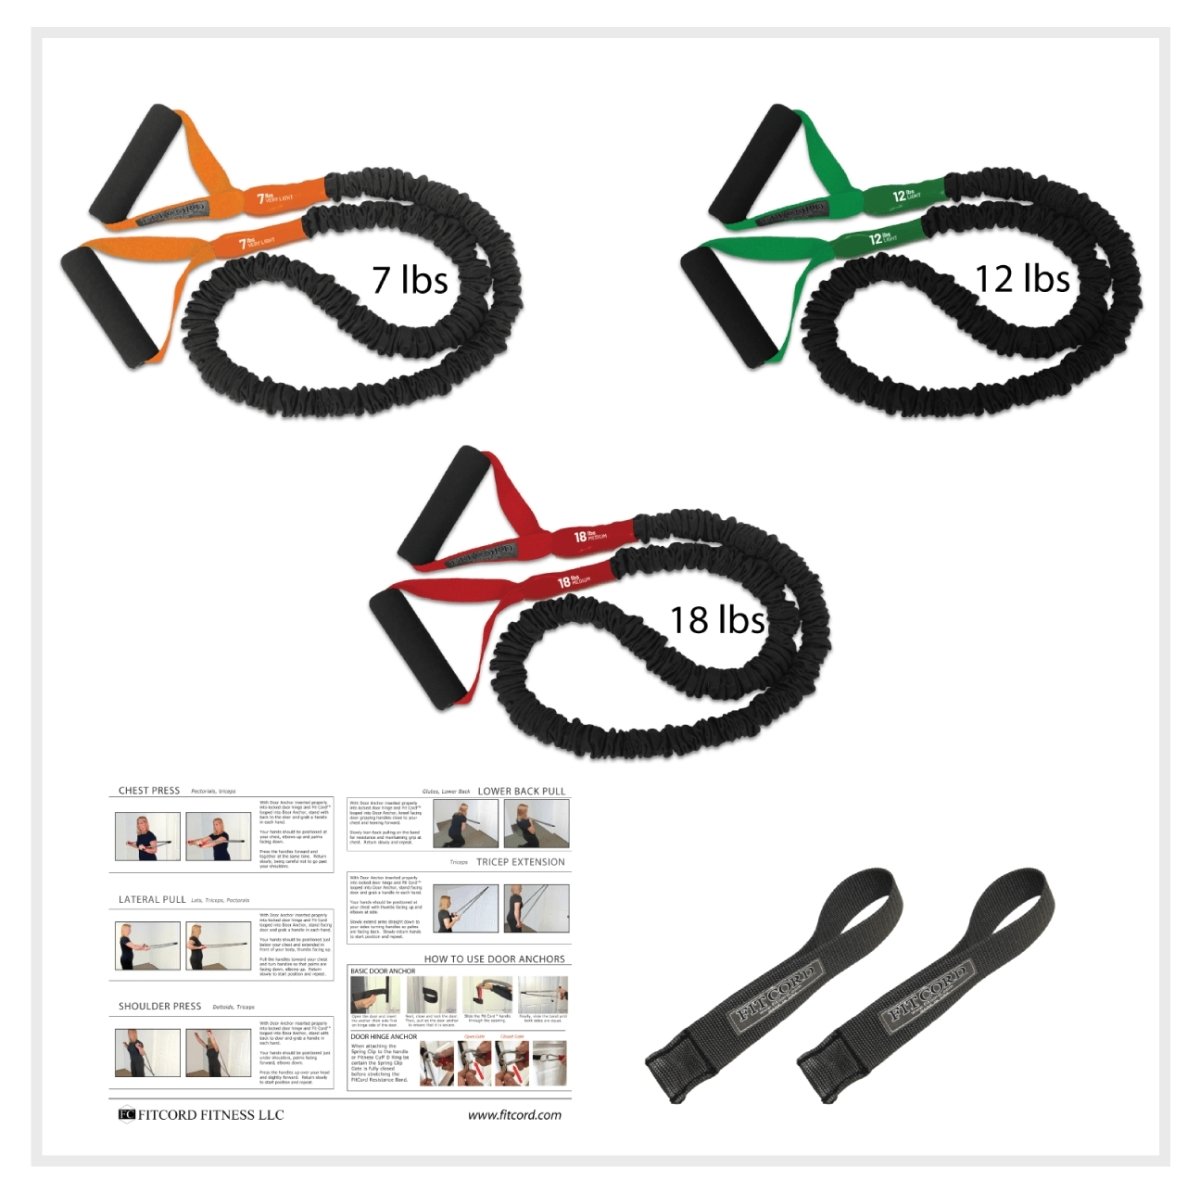 FitCord Mini Home Gym - FitCord Resistance Bands American made home gym to workout at home. safety sleeve for your protection from snap back and padded handles for comfort. Compare to Bodylastics and Fit Bands